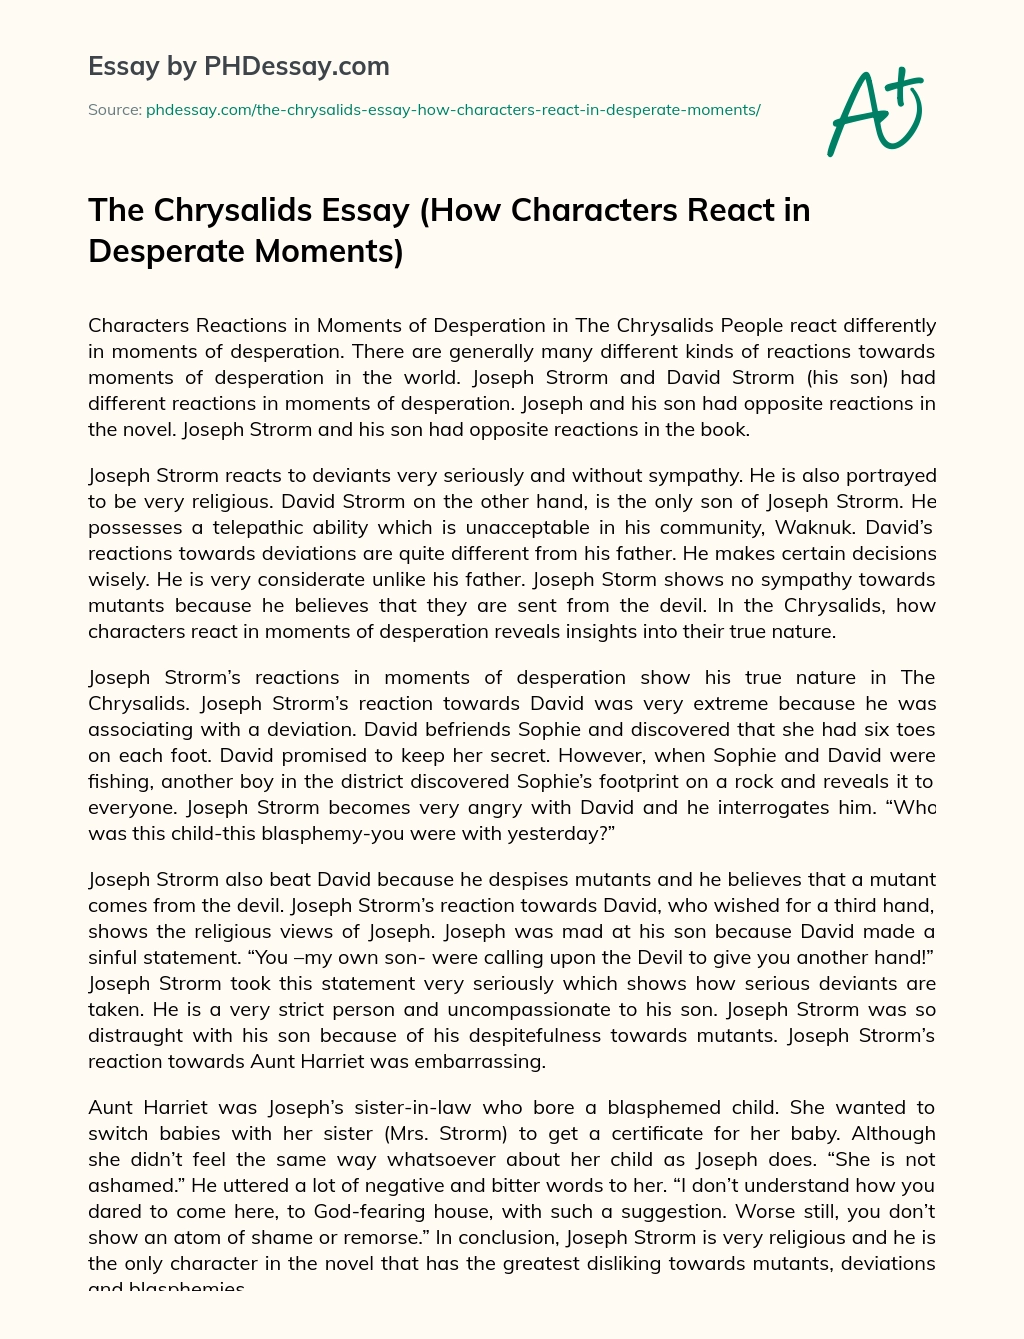 The Chrysalids Essay (How Characters React in Desperate Moments) essay